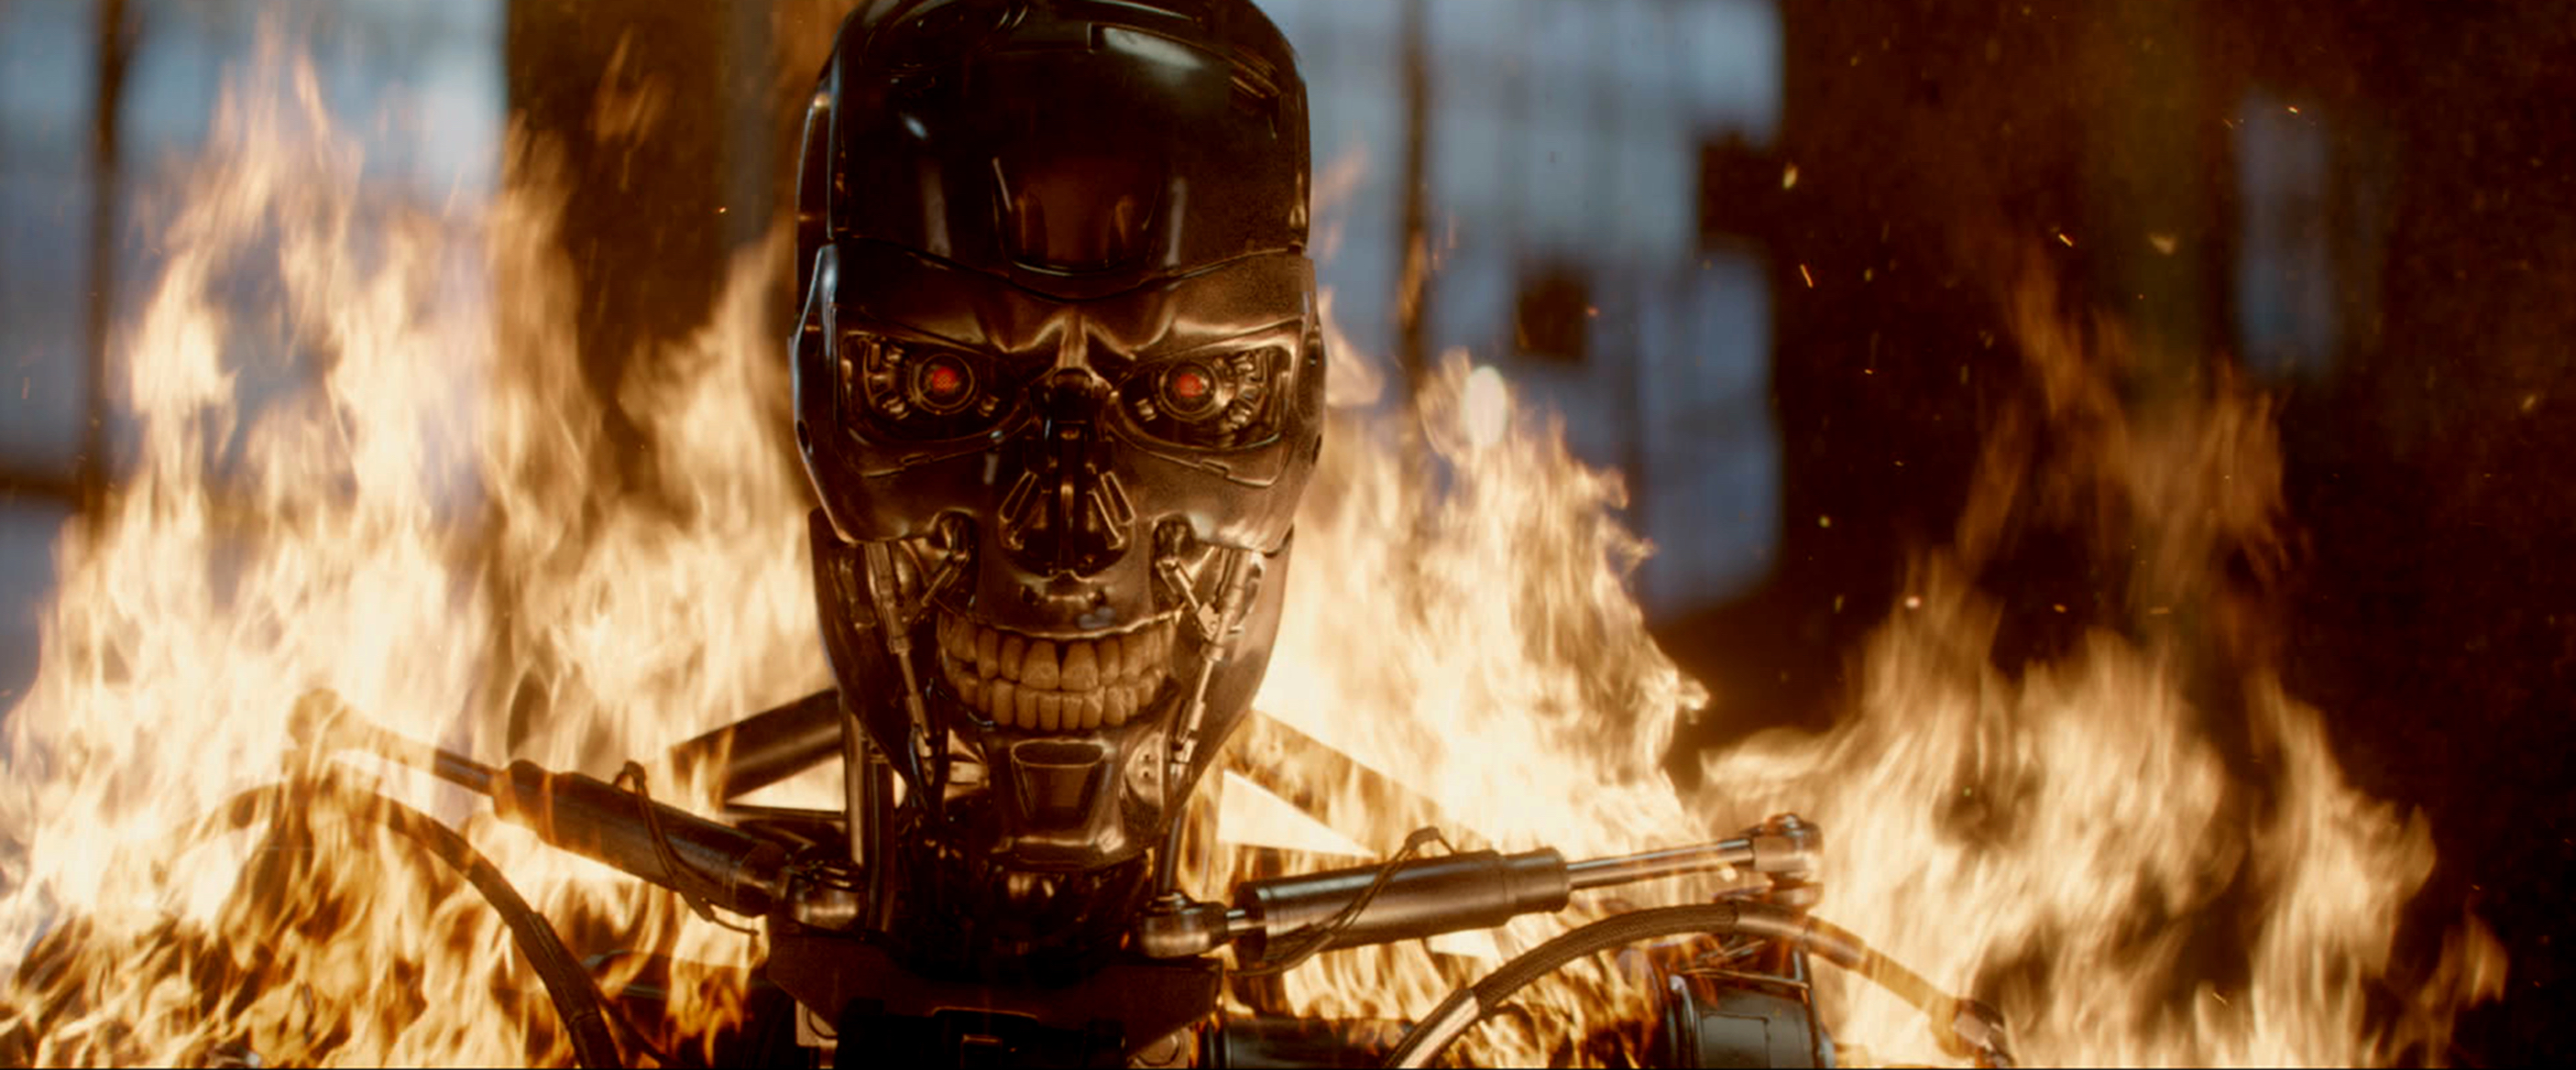 Terminator Genisys (image source: Paramount Pictures)